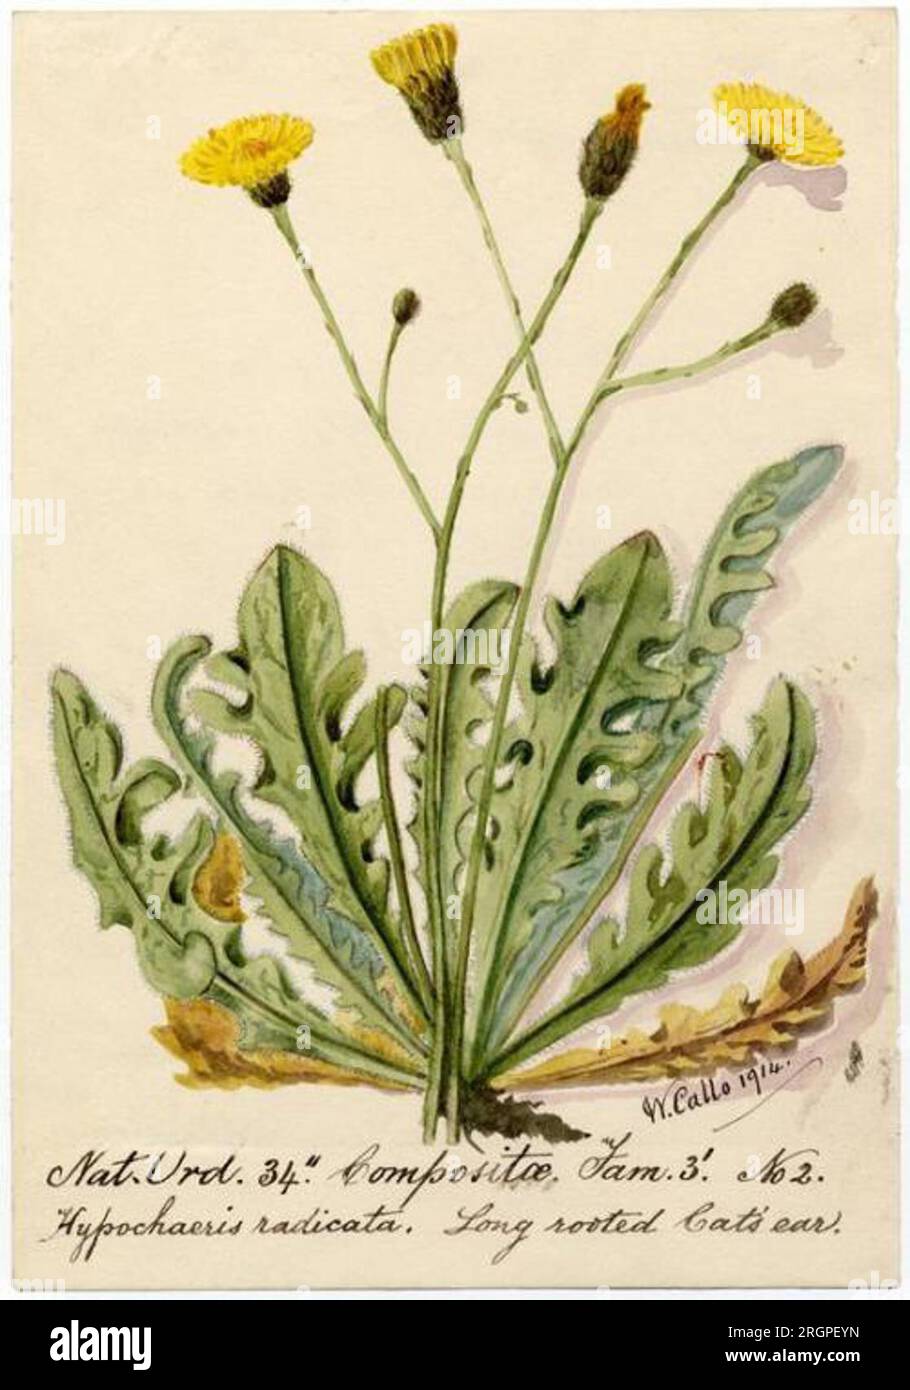 Long rooted Cat's ear  (Hypochaeris radicata) - William Catto 1914 by William Catto Stock Photo